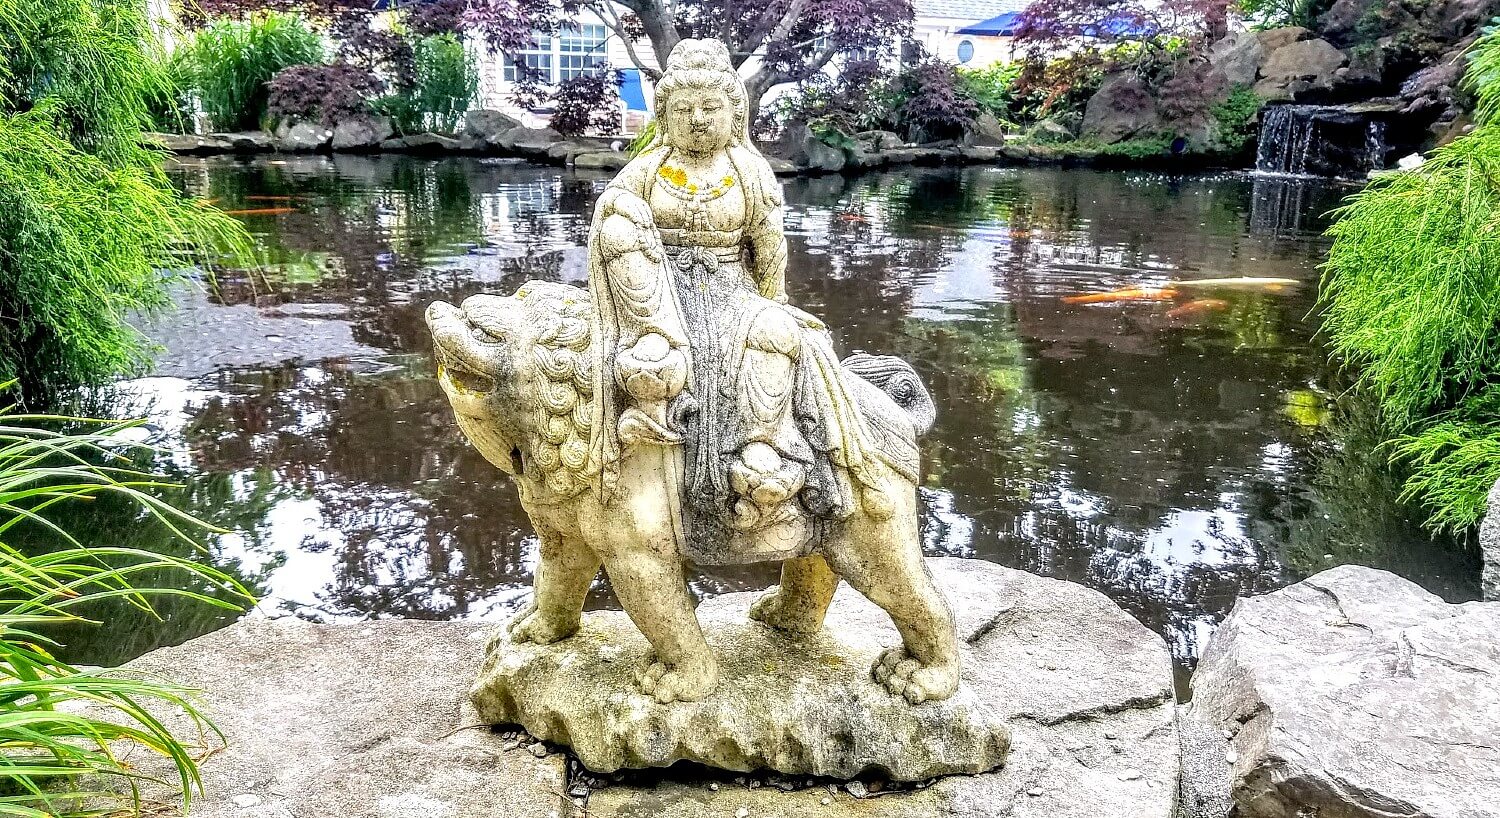 Large stone Asian-inspired statue on top of a large rock at the edge of a pond surrounded by colorful trees and plants